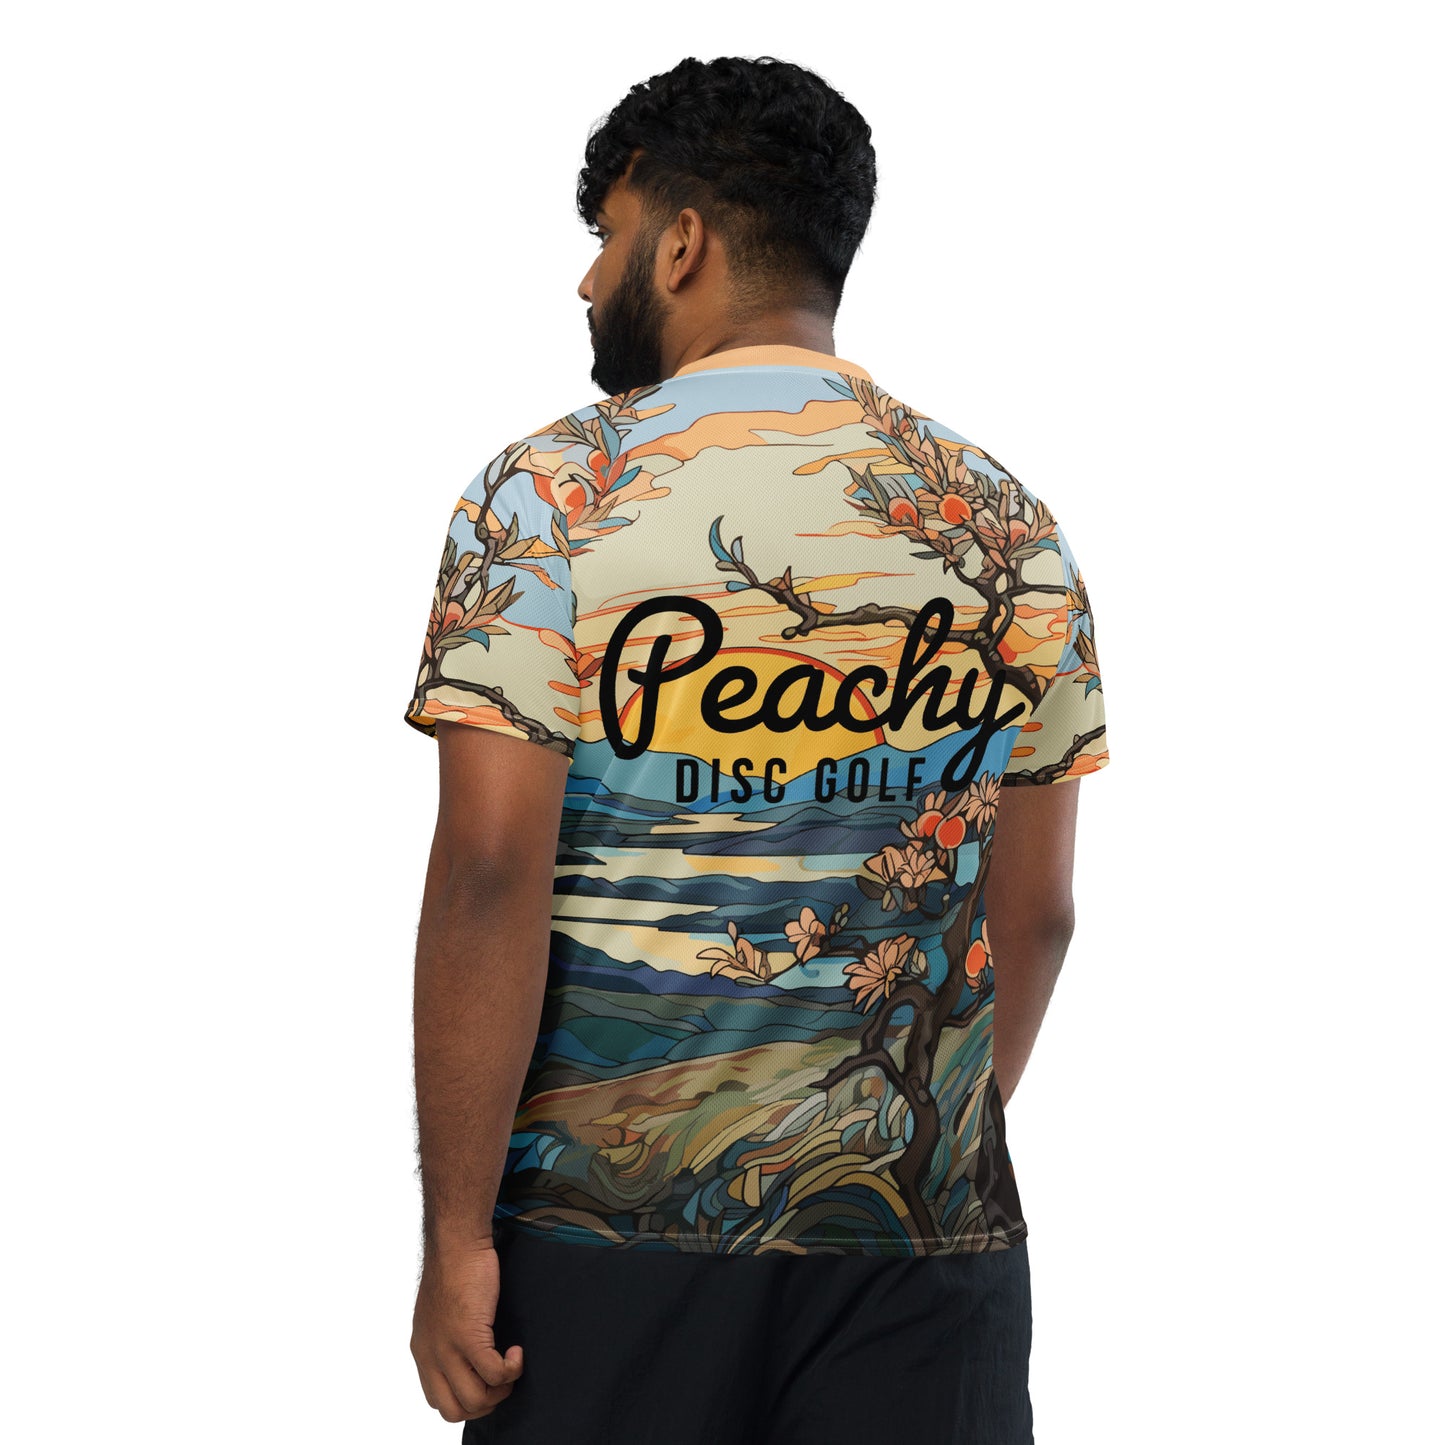 Recycled Unisex Jersey - Peachy Disc Golf